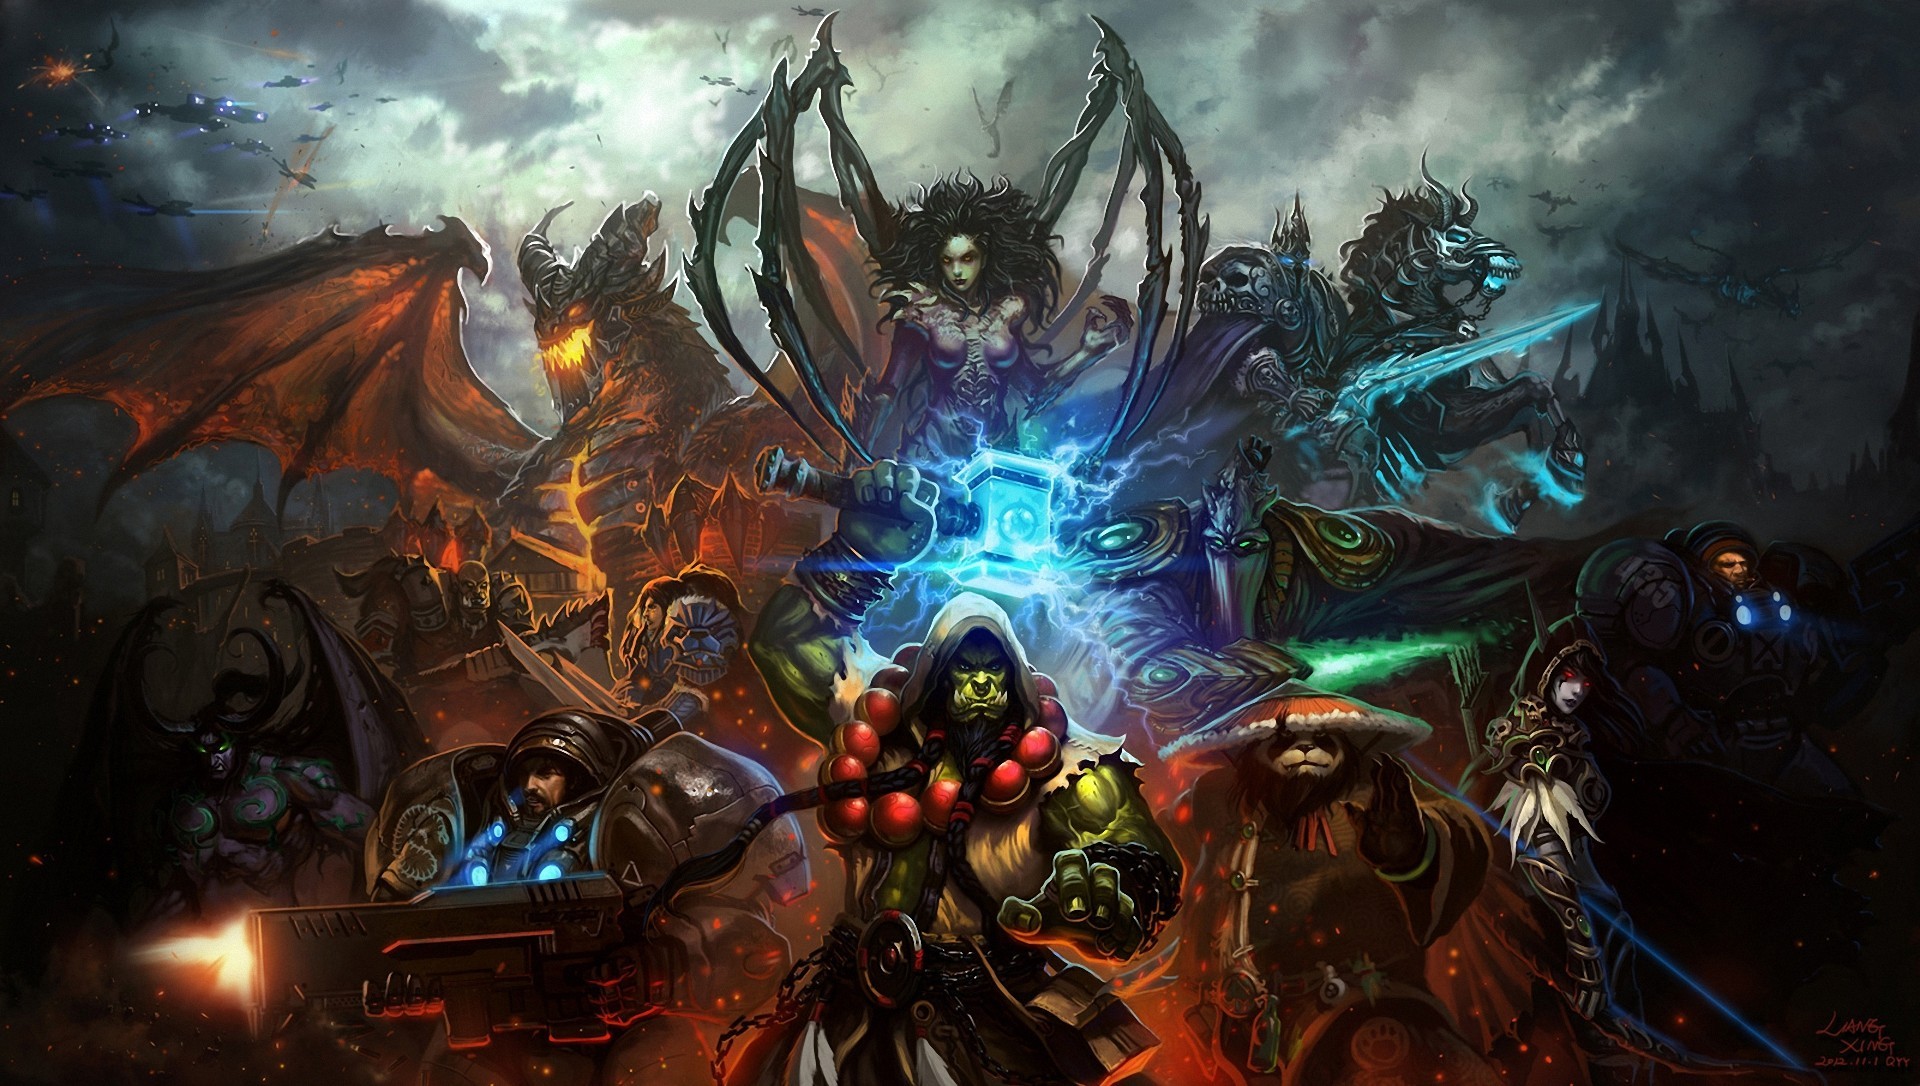  of warcraft mists of pandaria starcraft characters orc wallpaper